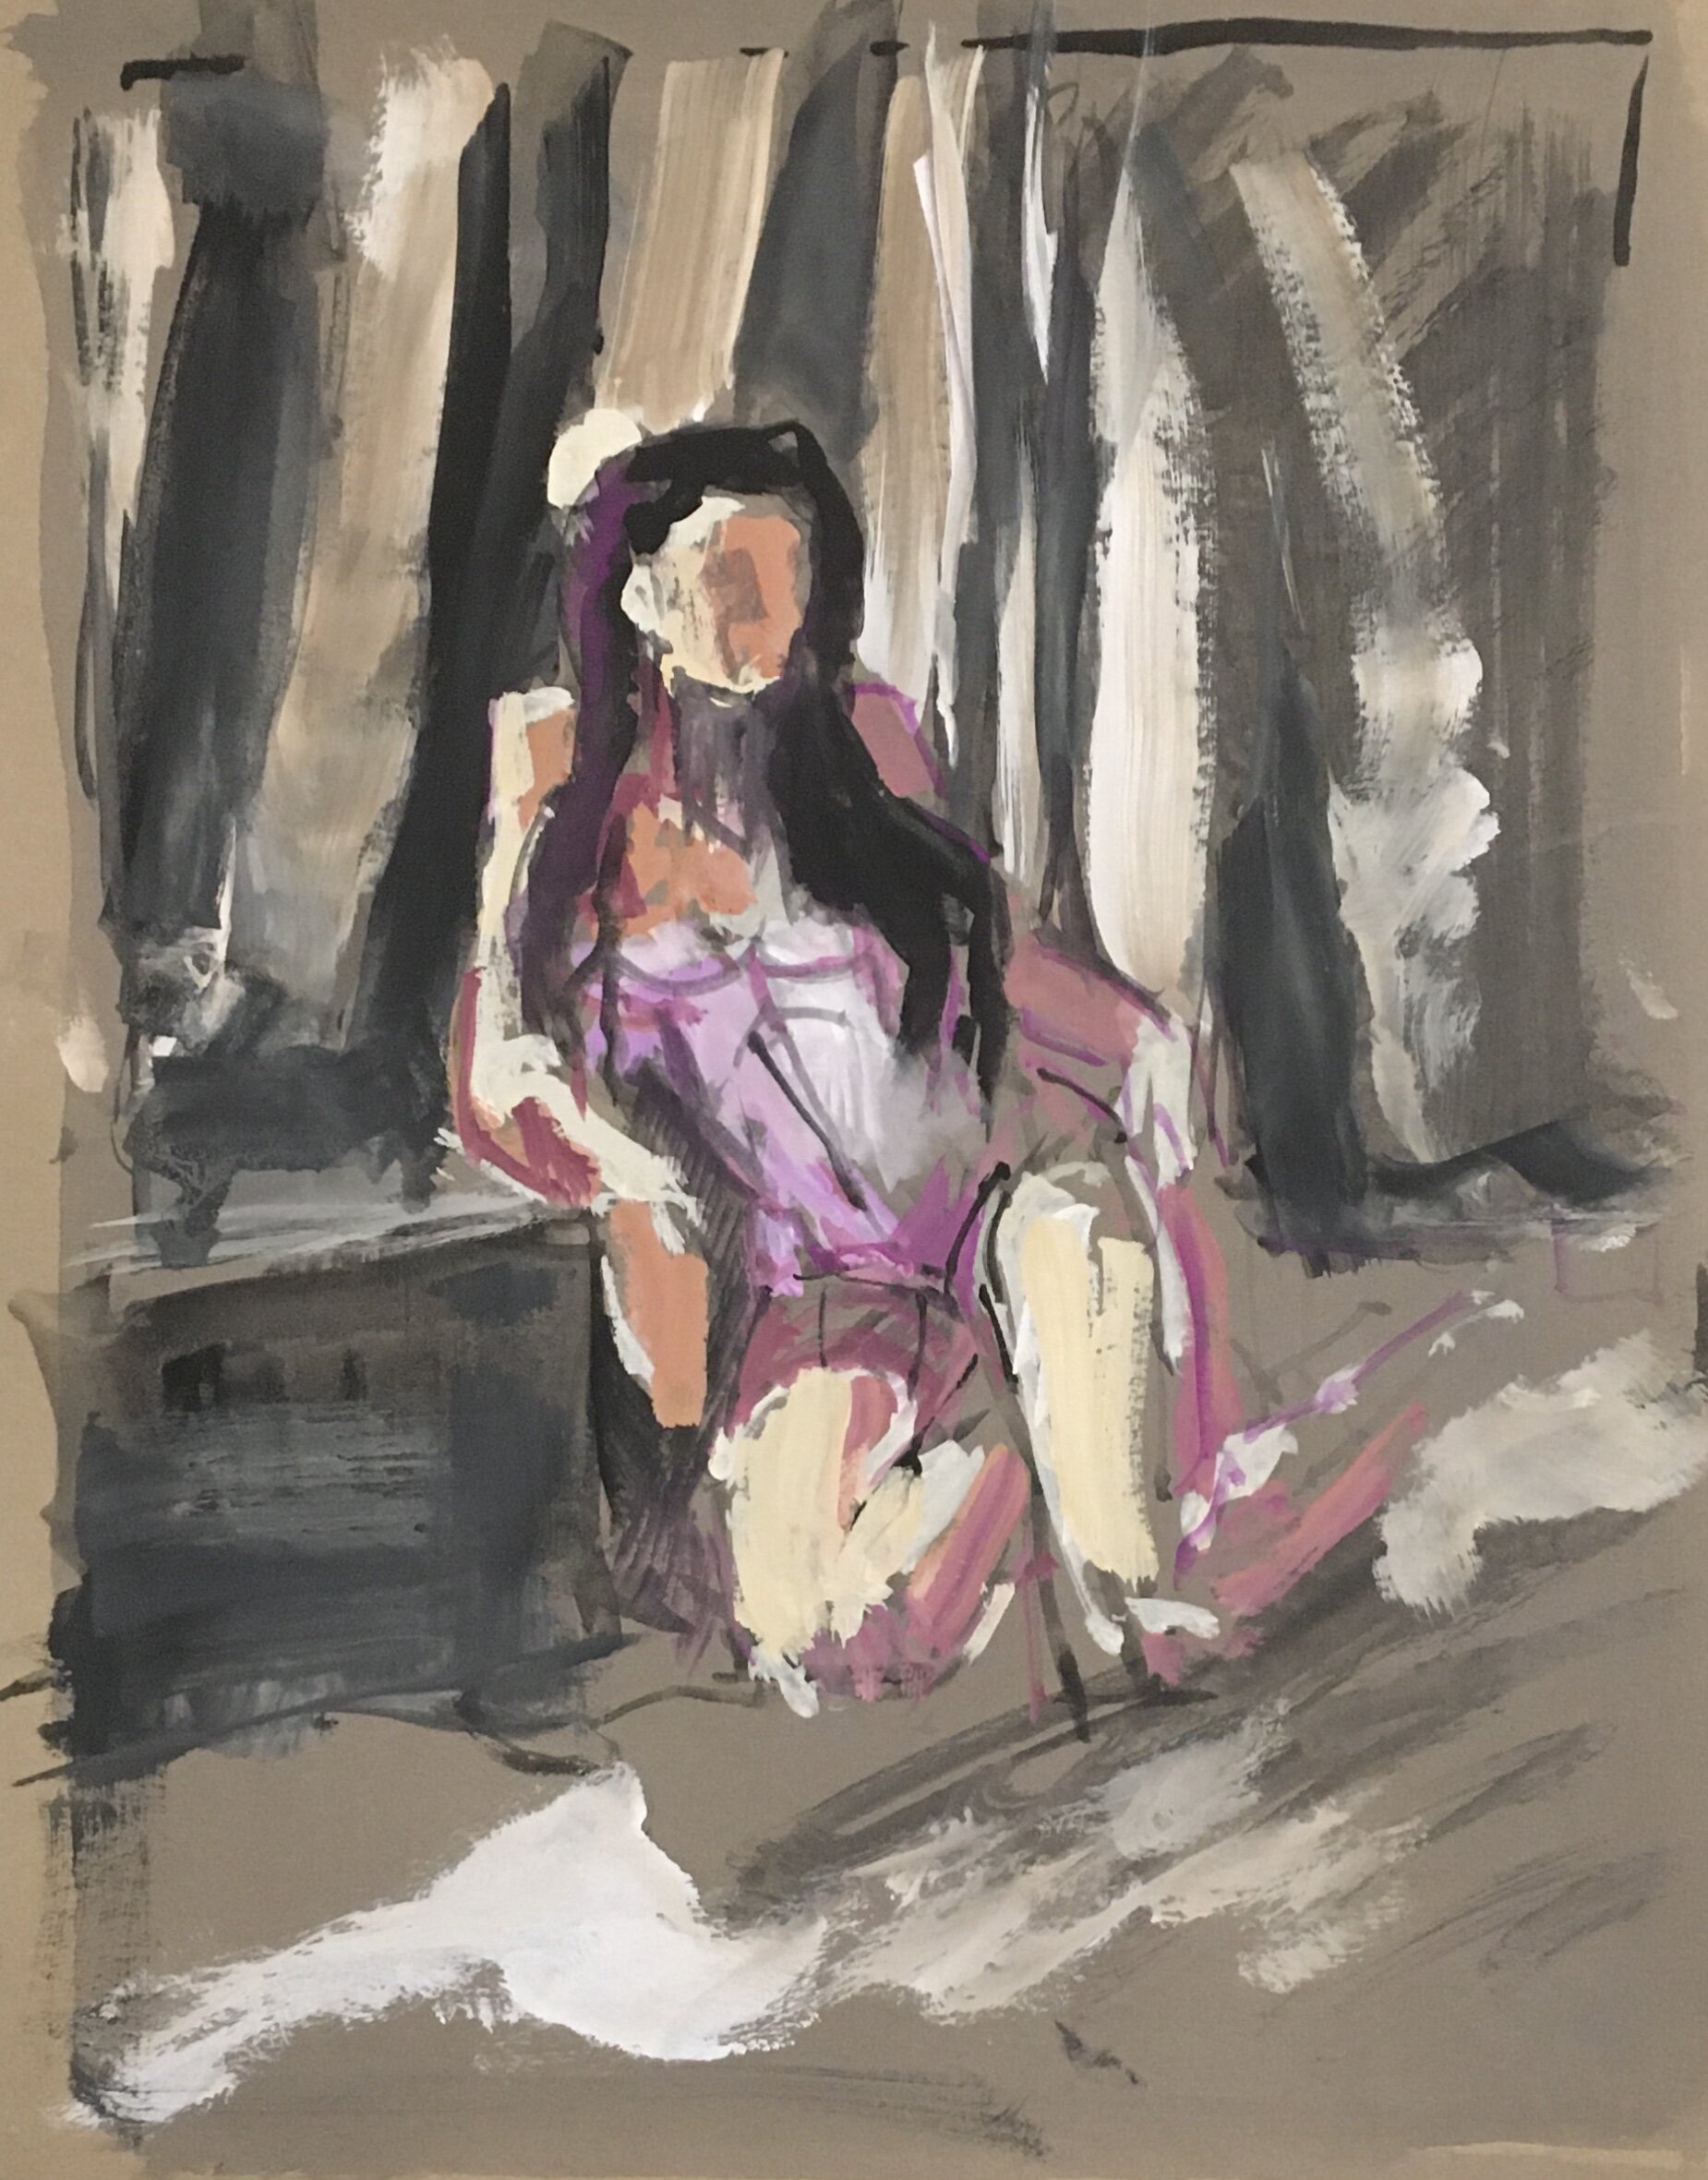 Sylvana Seated, Gouache on paper, 9 by 12 inches, 2020.